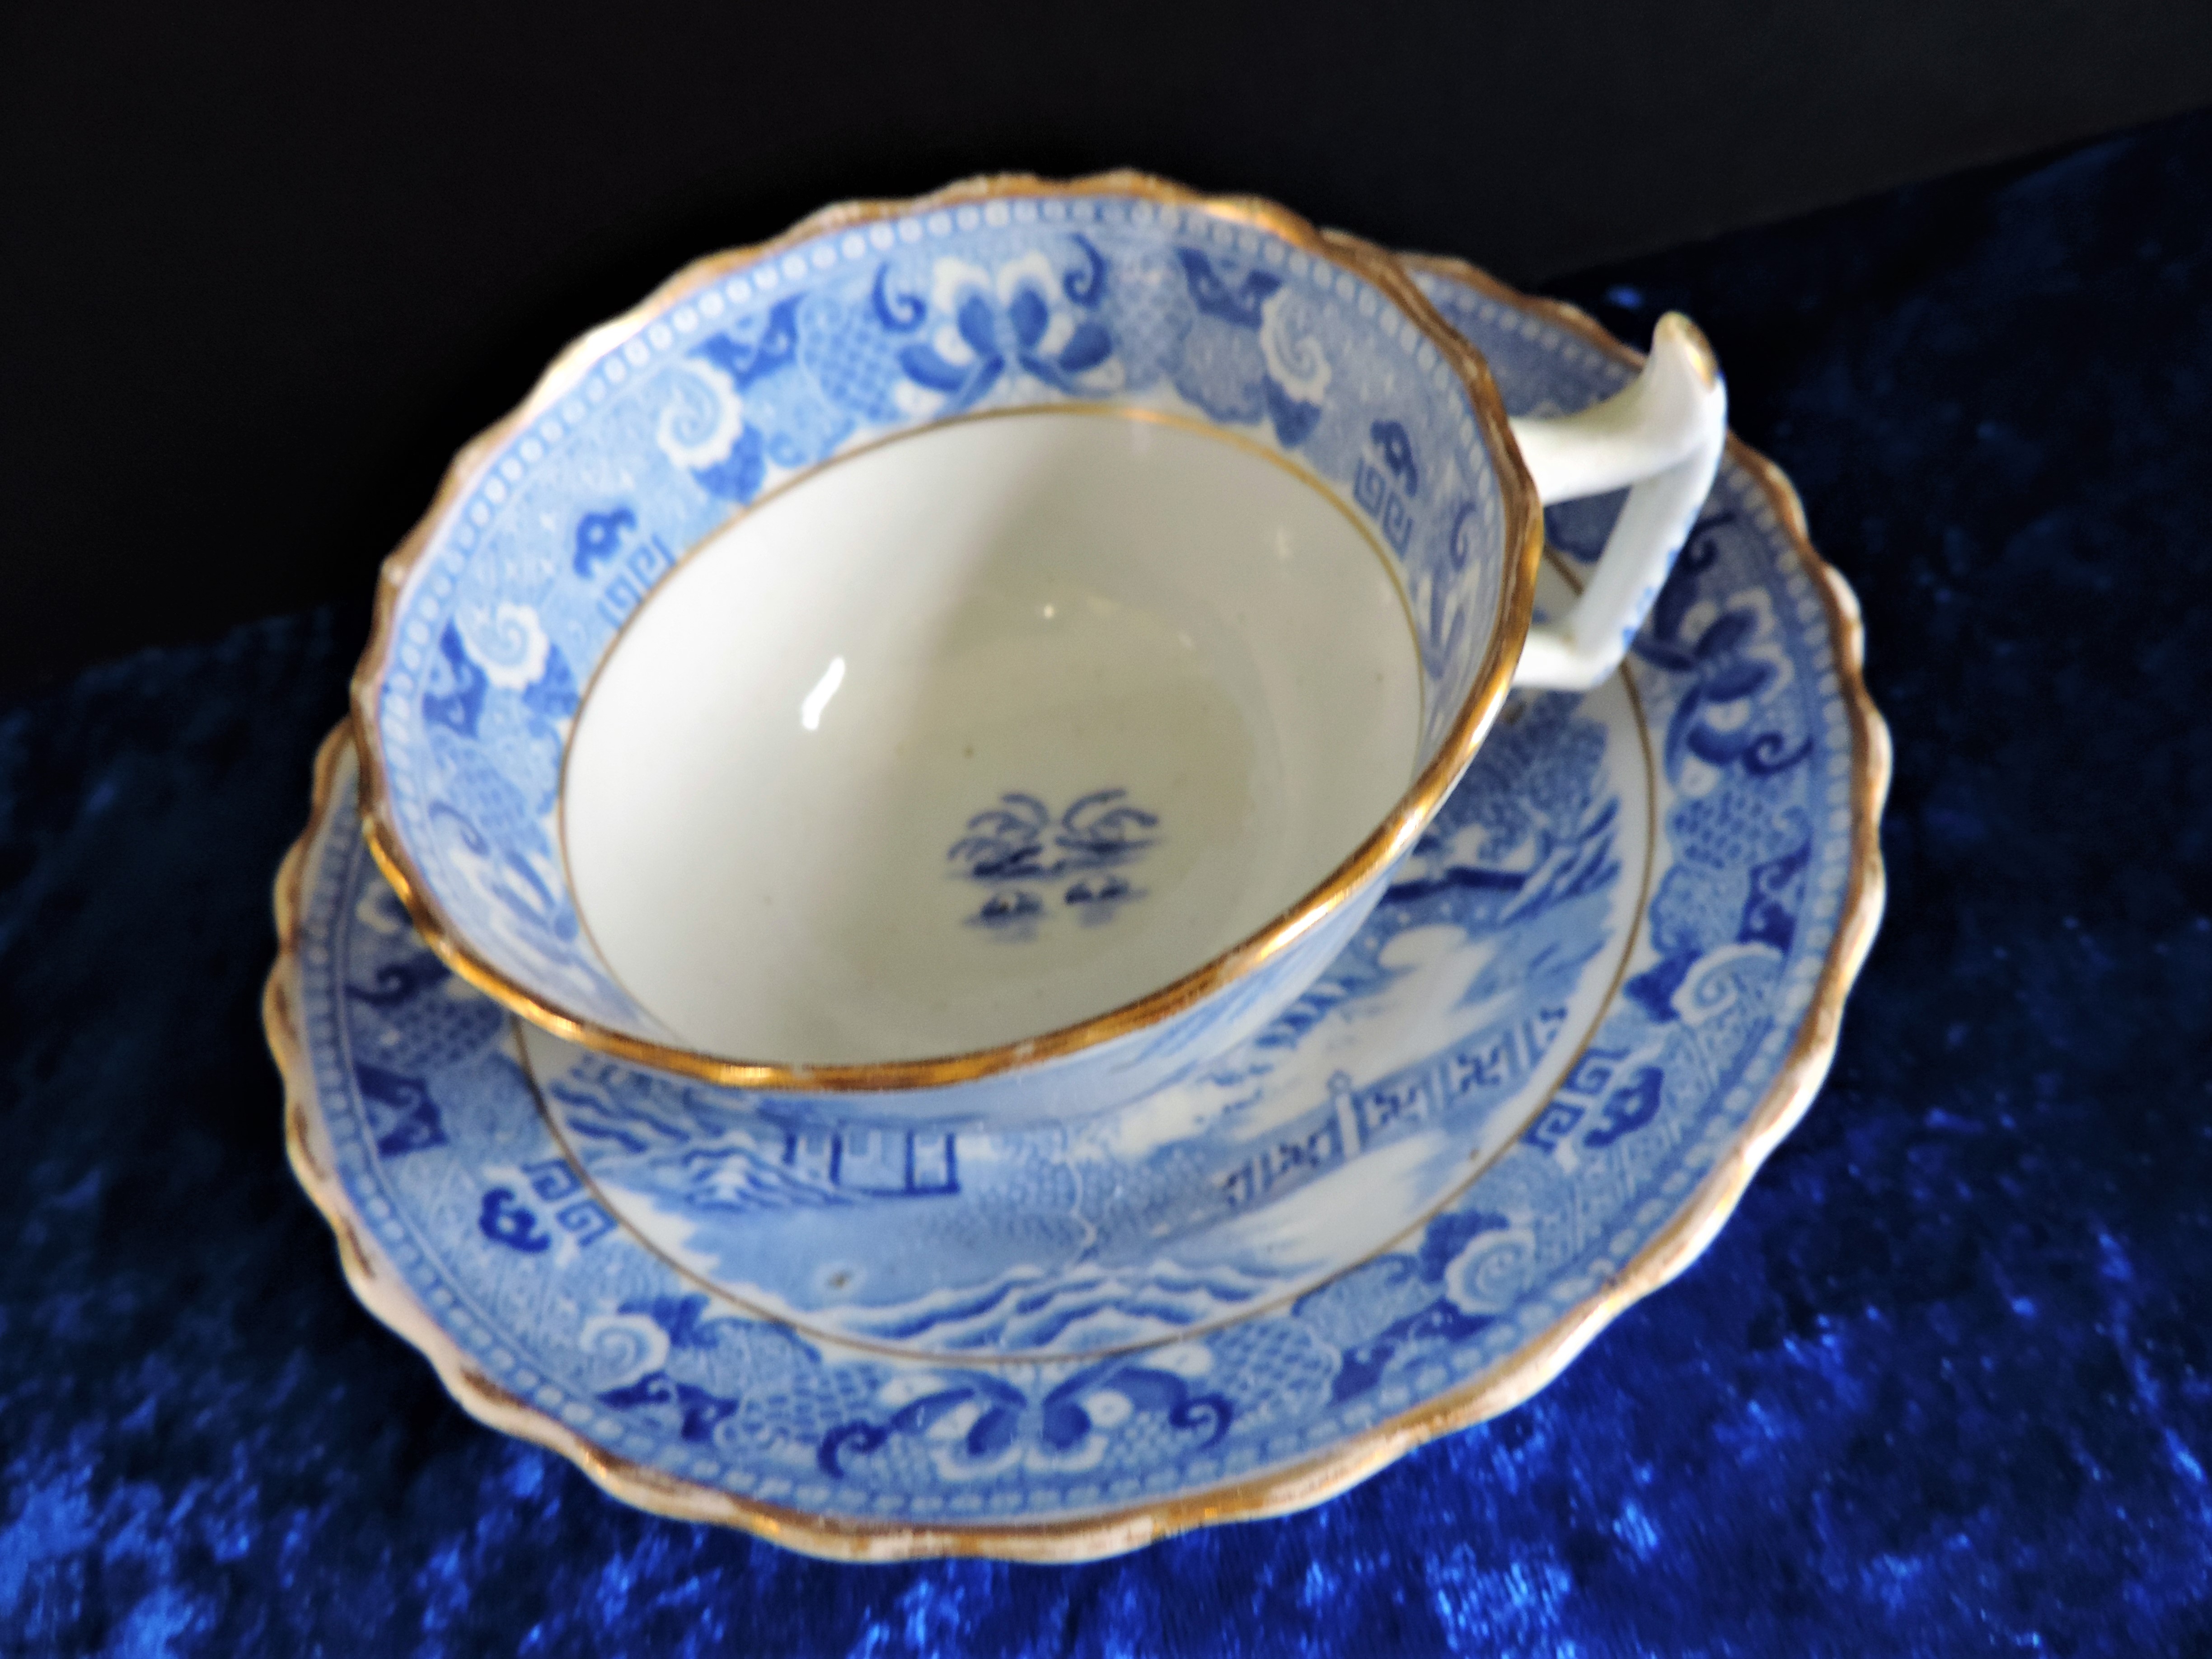 Antique Blue & White Chinoiserie Tea Cup and Saucer. Circa 1820 Brosley Pattern Tea Cup and Saucer - - Bild 3 aus 6